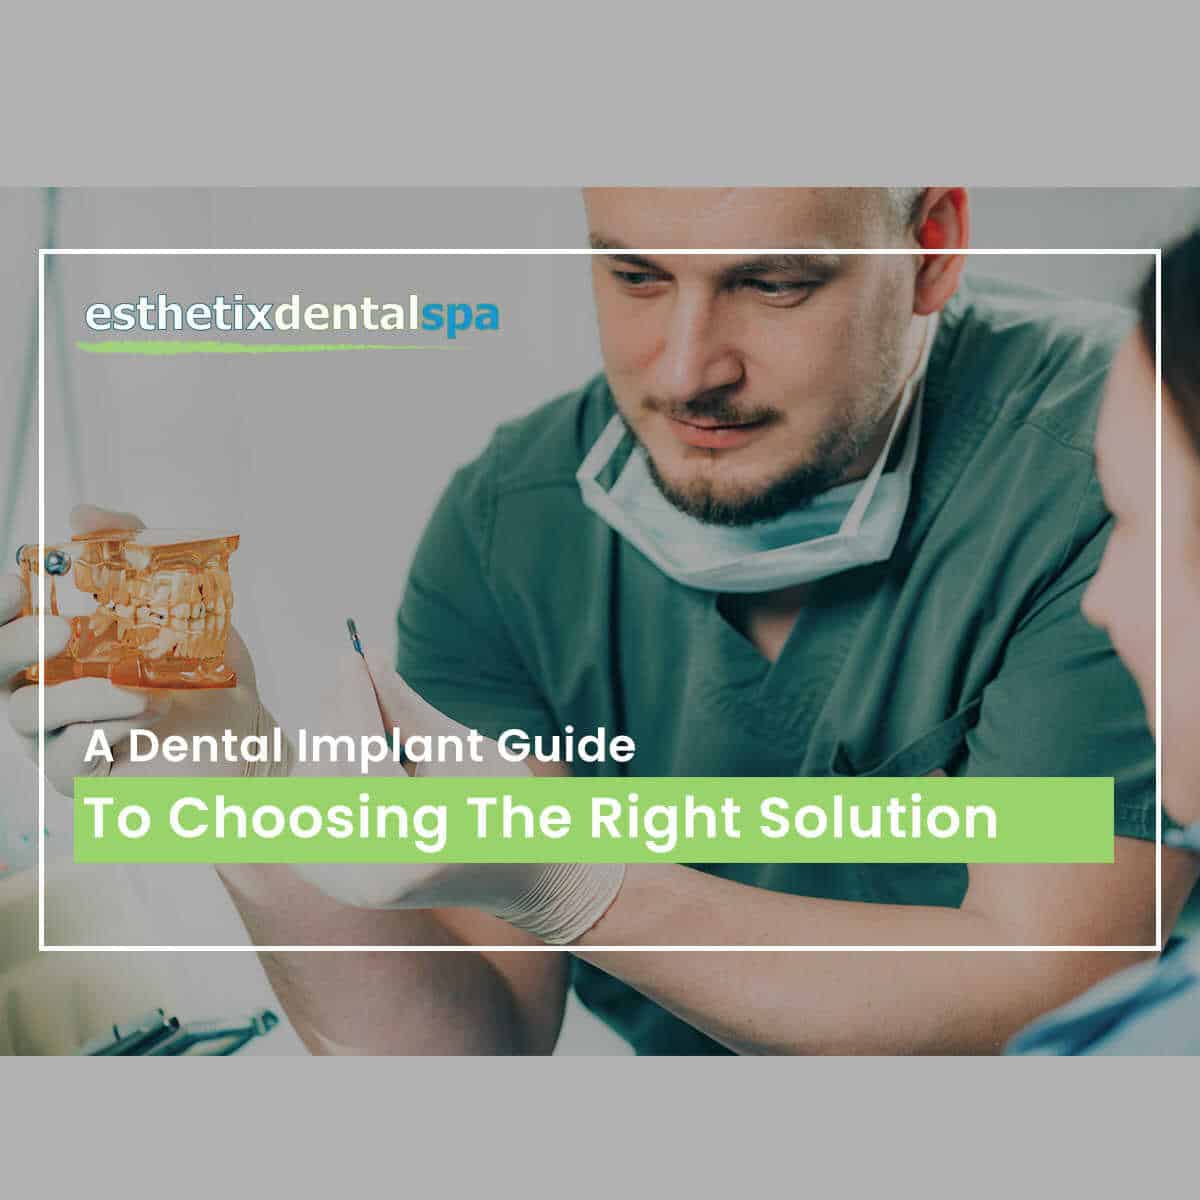 A Dental Implant Guide To Choosing The Right Solution